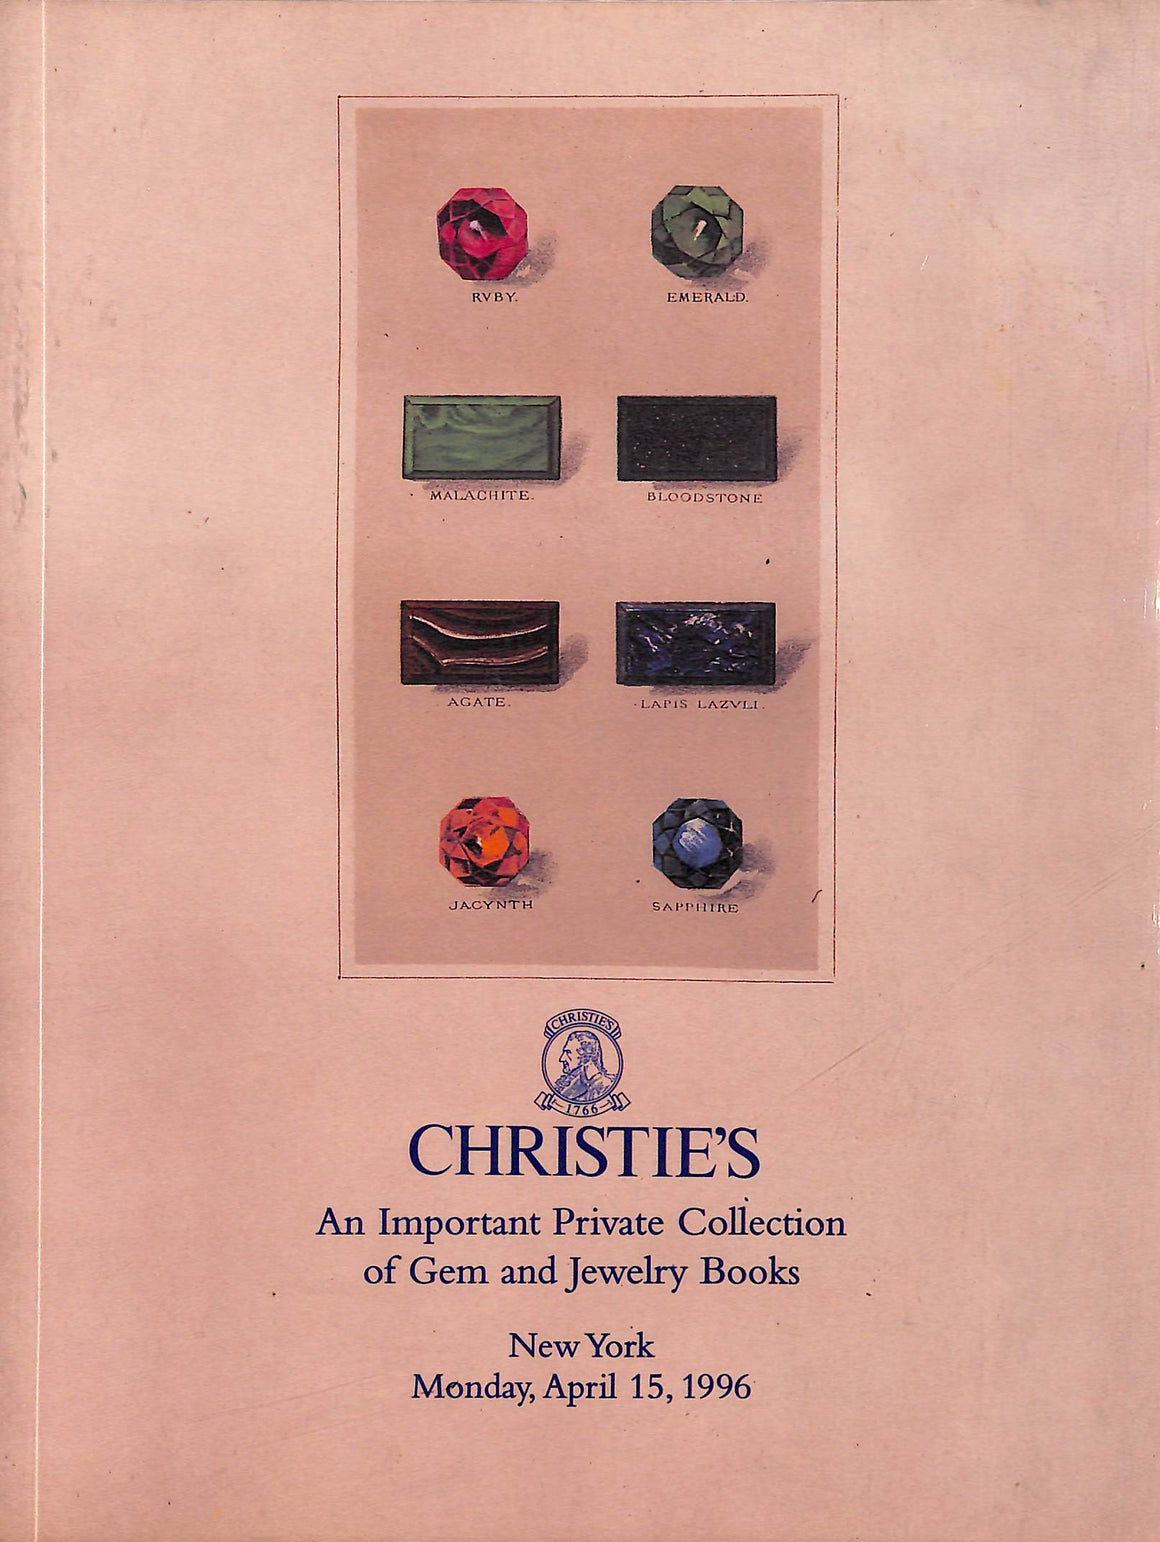 An Important Private Collection of Gem and Jewelry Books: Christie's 1996